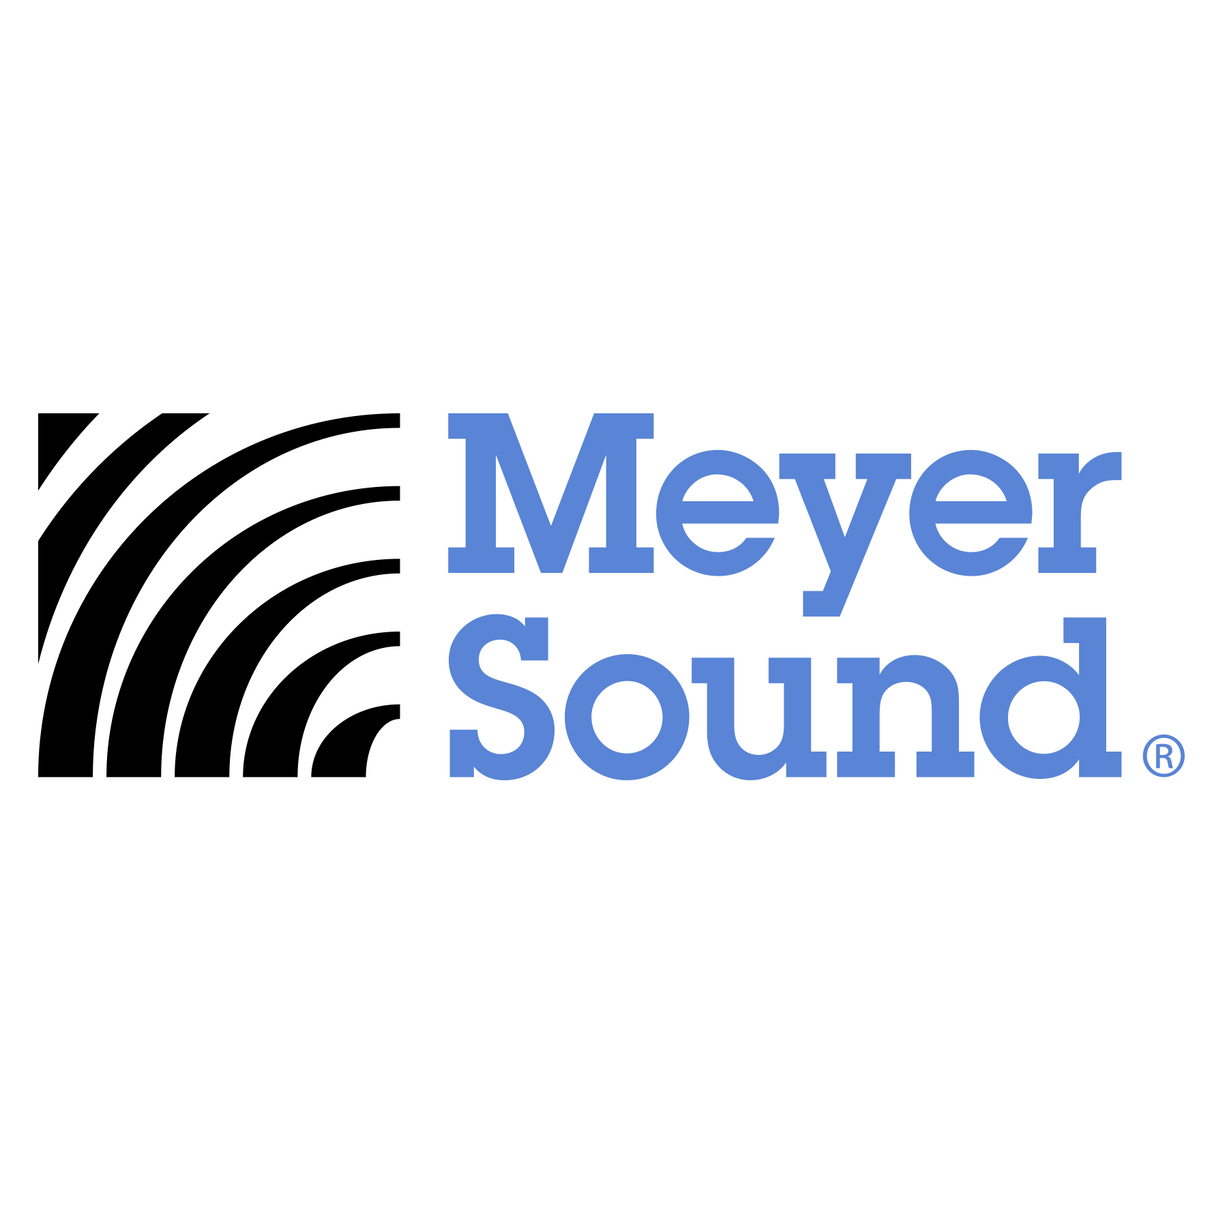 Meyer Sound U-bracket - Used to floor or ceiling-mount M1D units (not recommended for mounting more than six M1Ds)